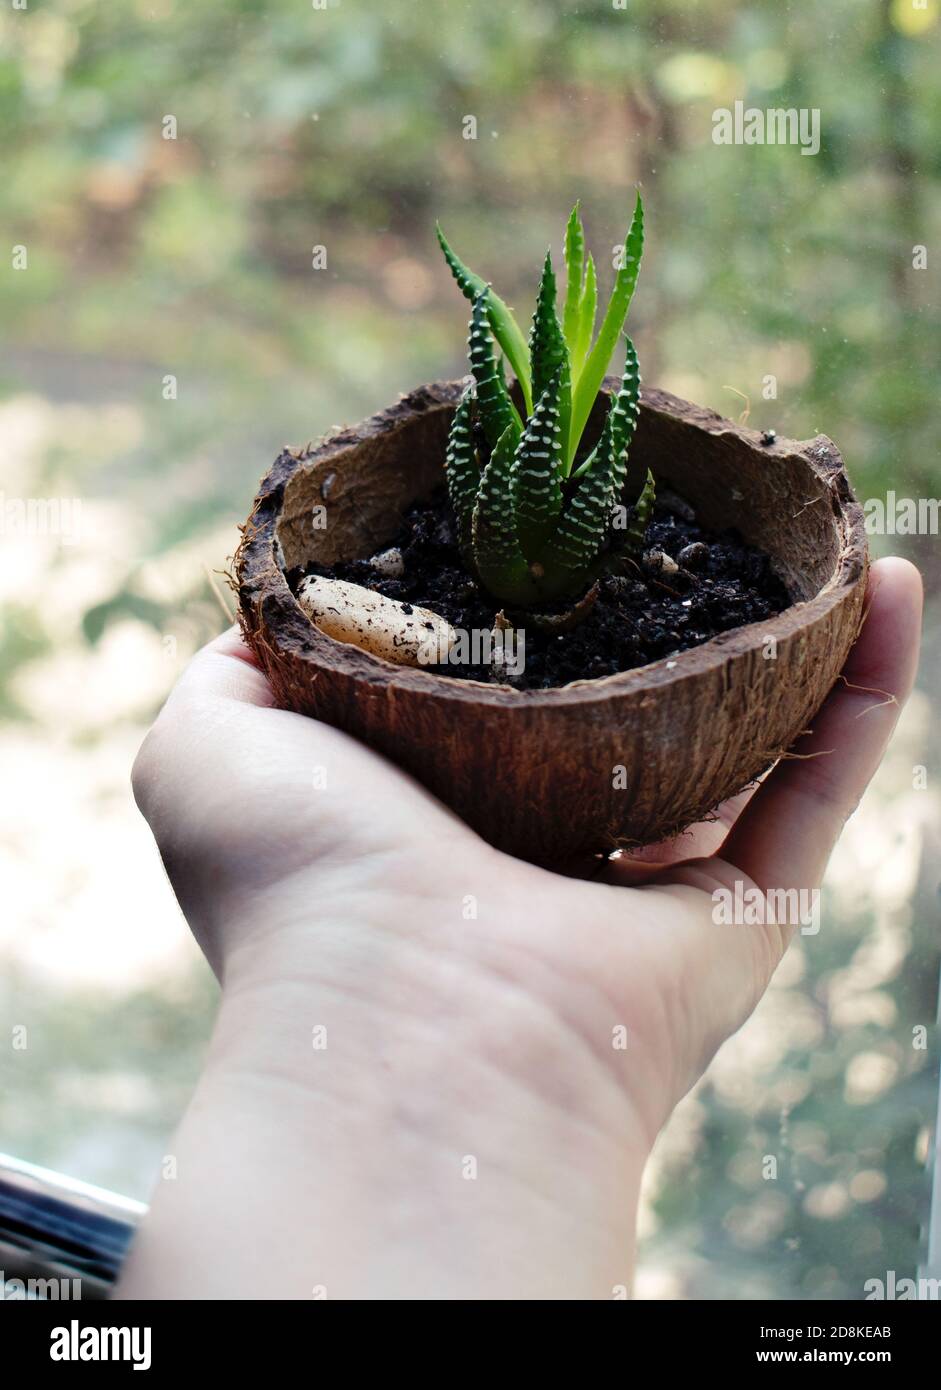 Hand holding a coconut shell with a green and white striped succulent plant. Stock Photo